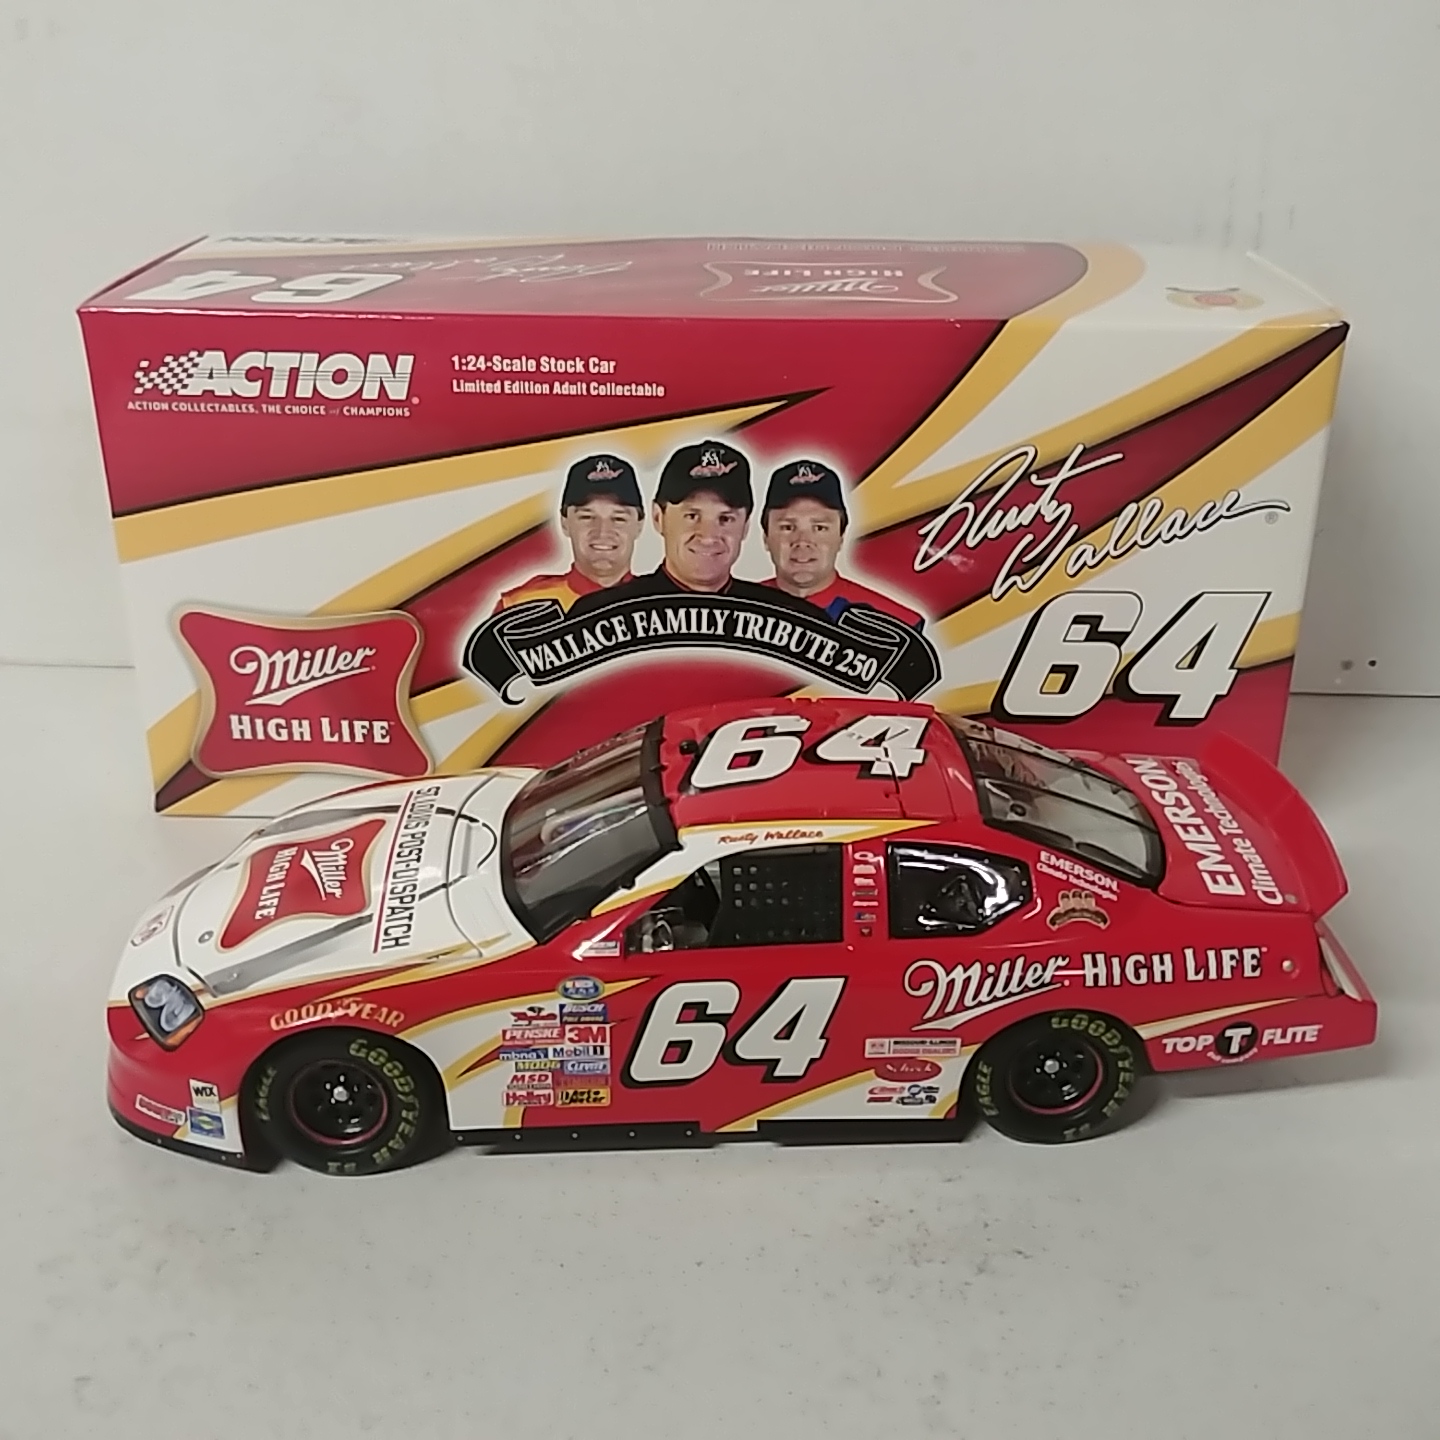 2005 Rusty Wallace 1/24th Miller High Life "Wallace Family Tribute""Busch Series" c/w car